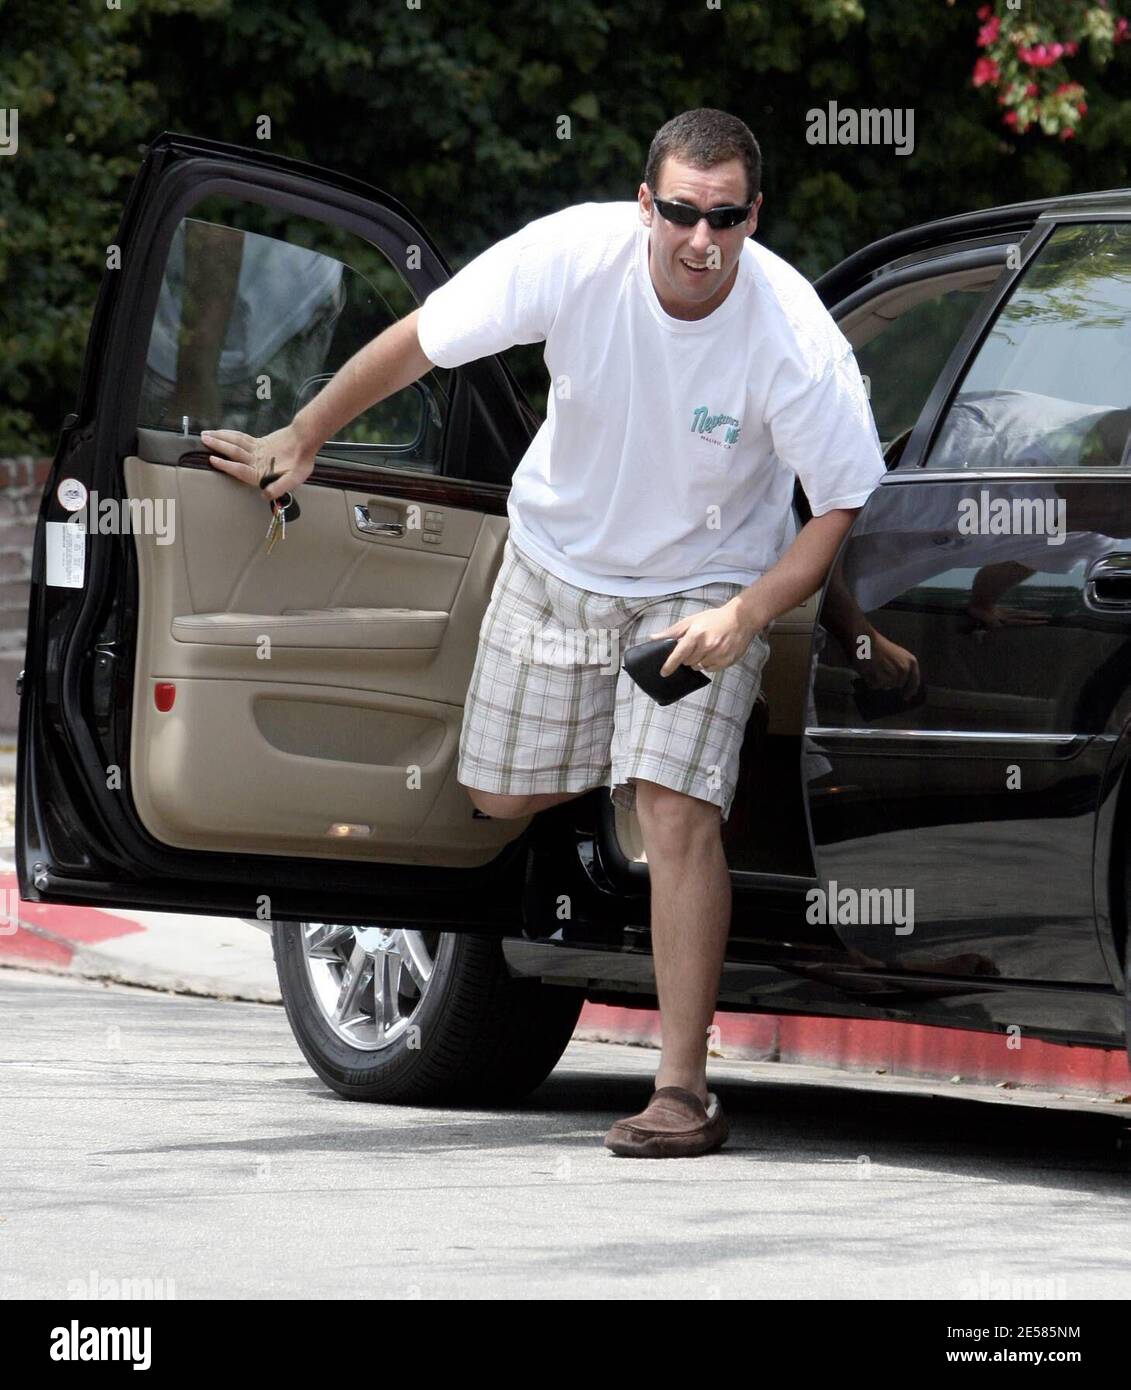 Exclusive!! Adam Sandler steps out with his daughter, Sadie Madison, who  just turned one year old this month. Sandler was sporting a pair of slippers,  shorts and a Malibu t-shirt. Los Angeles,